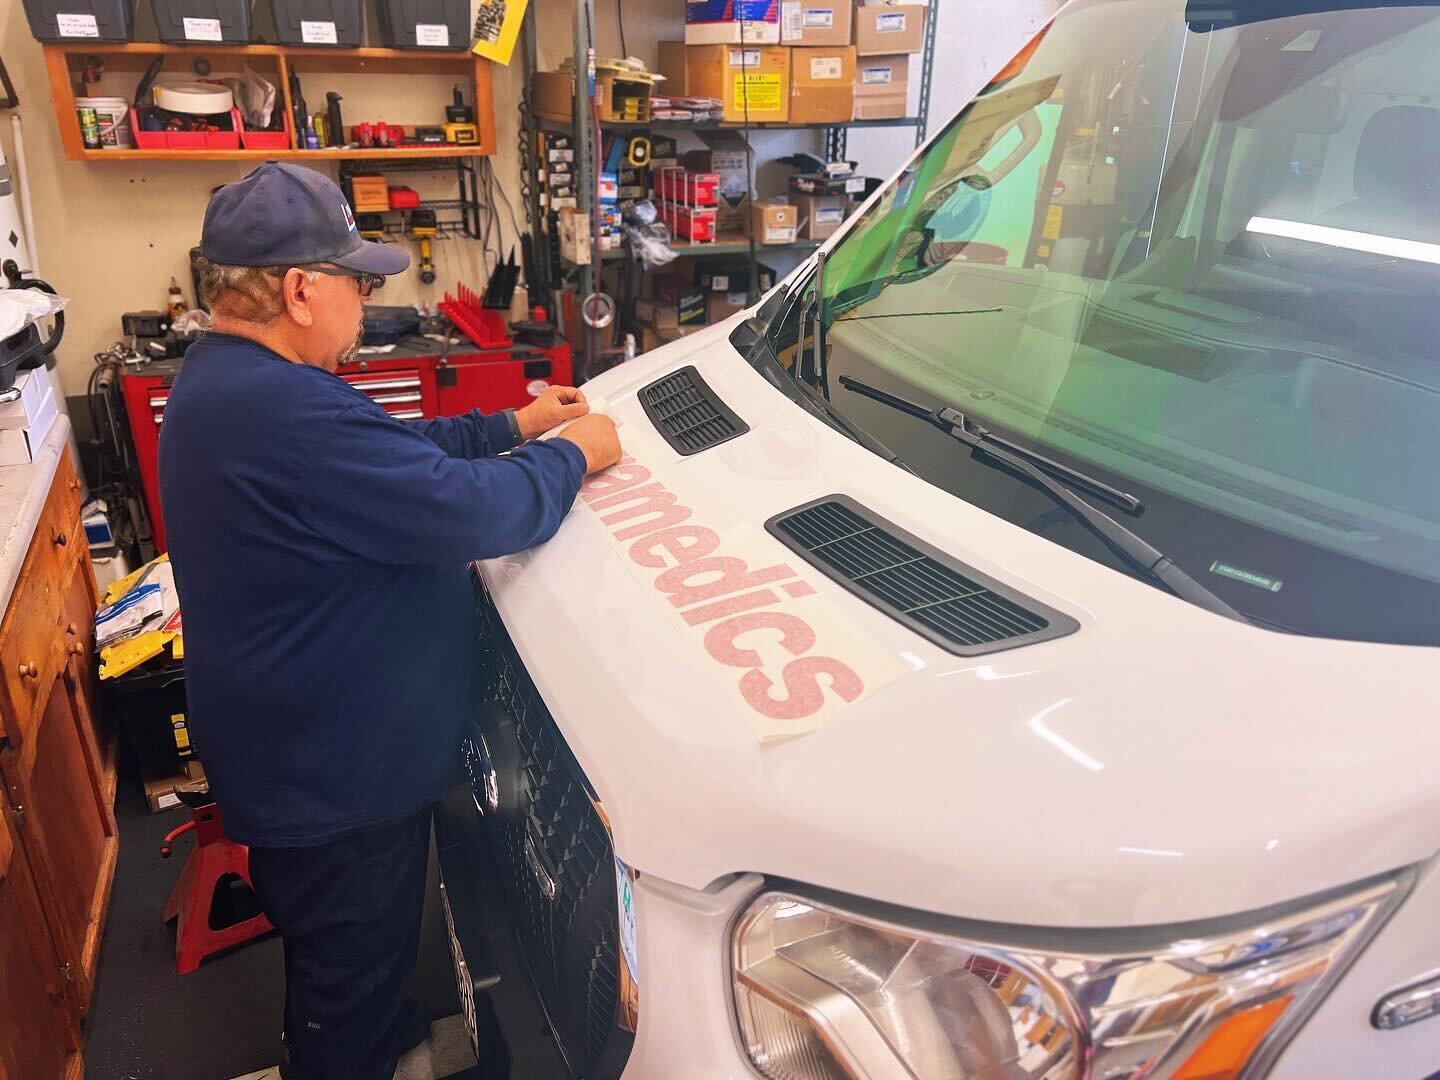 Spotlight on Service: Robert Carranza. 
  Commending 30 years of unwavering dedication, we shine the spotlight on Robert Carranza, an exceptional EMT-1/Fleet Services member since 1994. Robert embodies the essence of service, reflecting Martin Luther